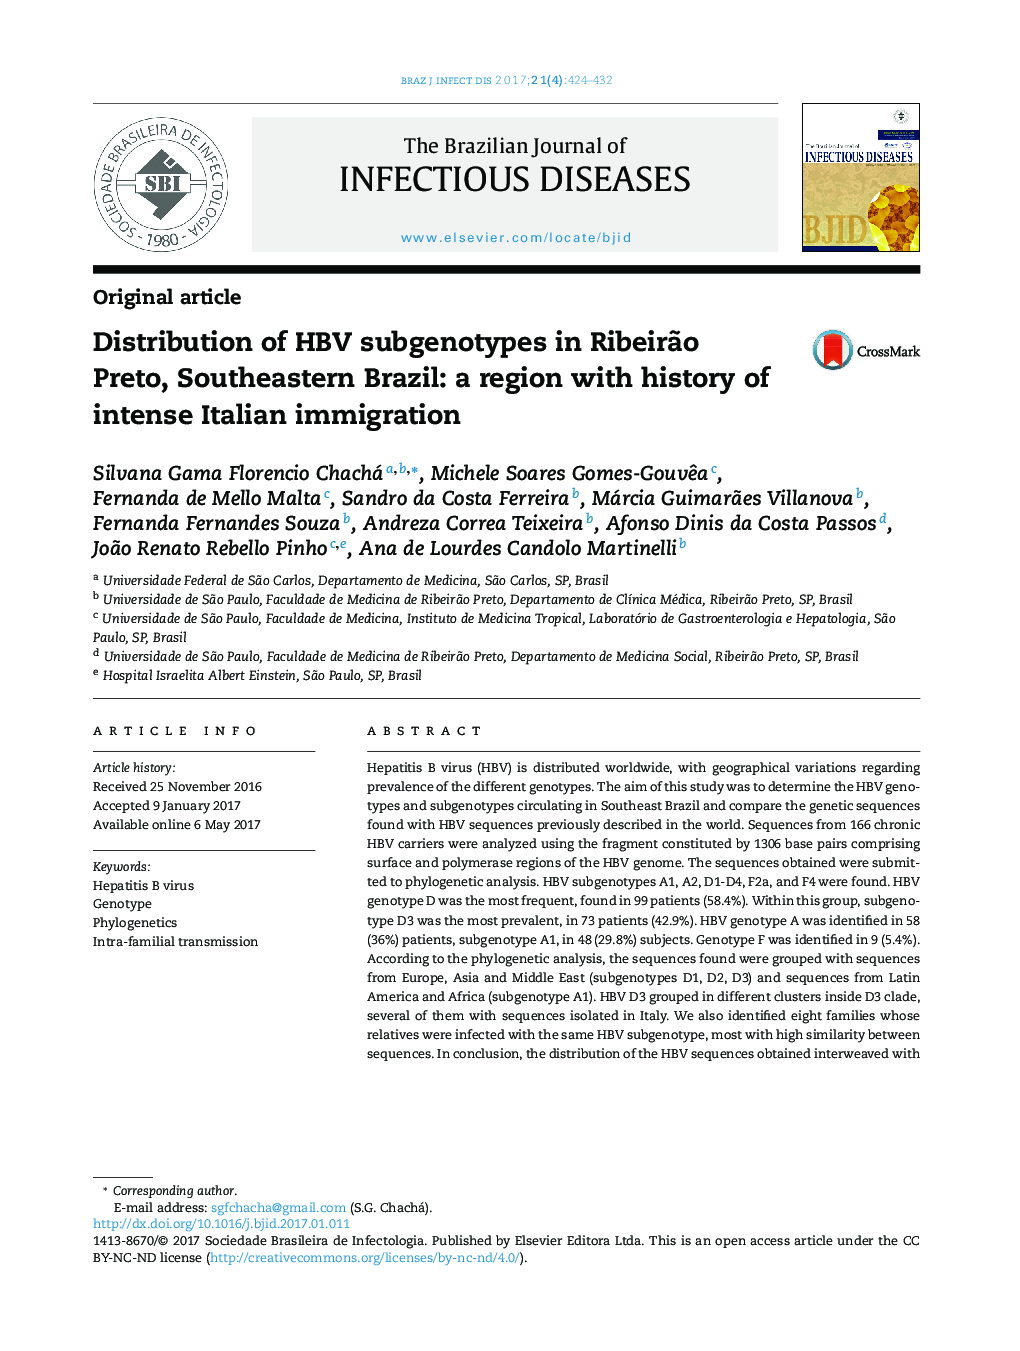 Distribution of HBV subgenotypes in RibeirÃ£o Preto, Southeastern Brazil: a region with history of intense Italian immigration